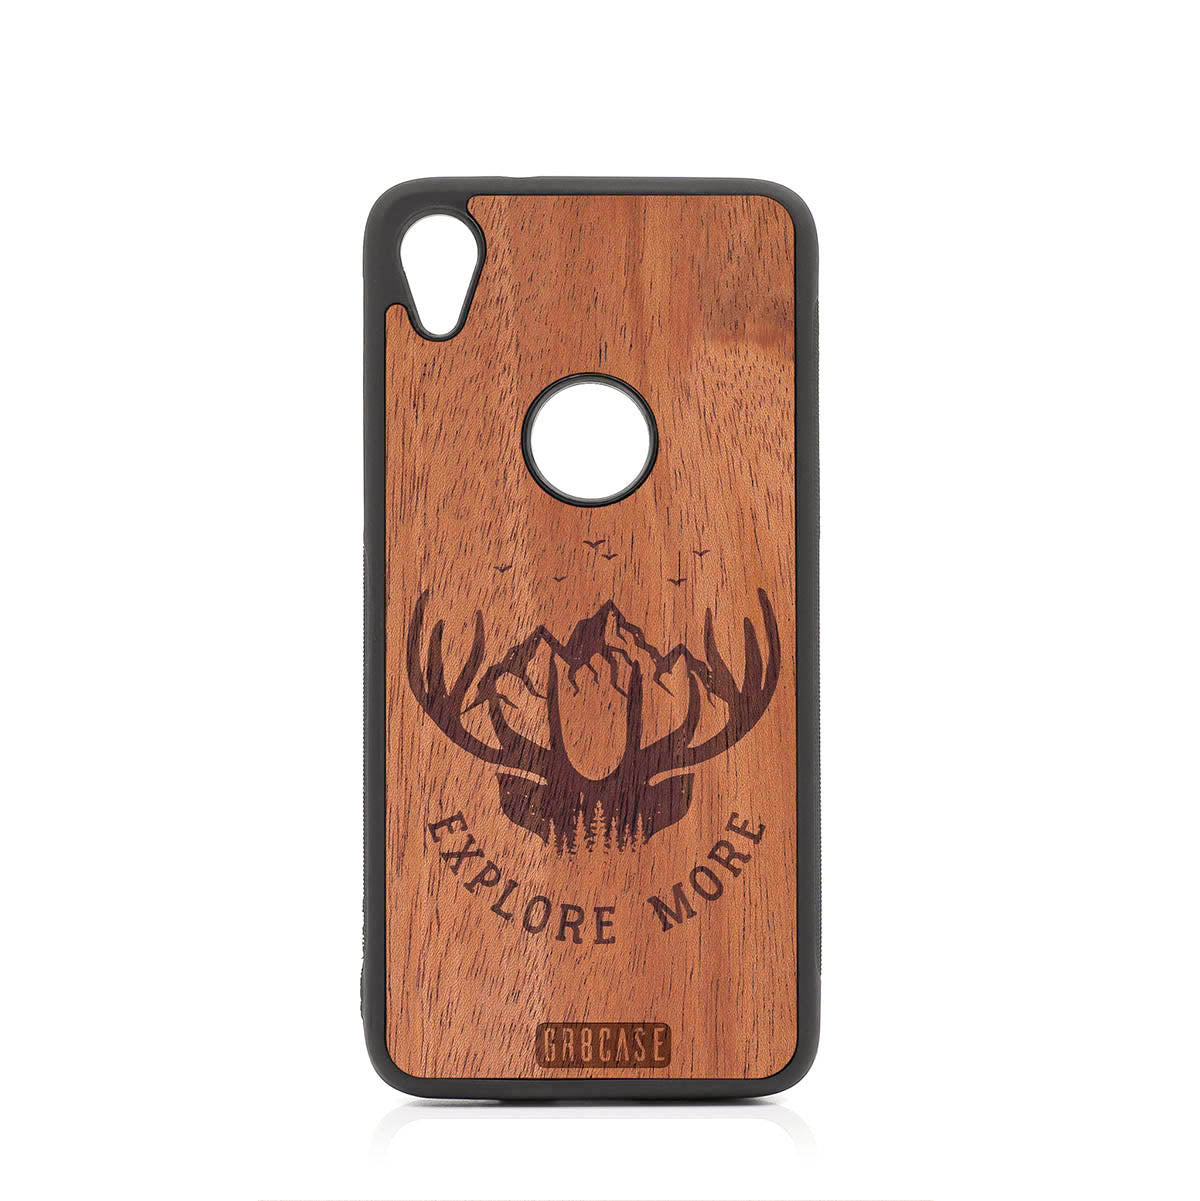 Explore More (Forest, Mountains & Antlers) Design Wood Case For Moto E6 by GR8CASE